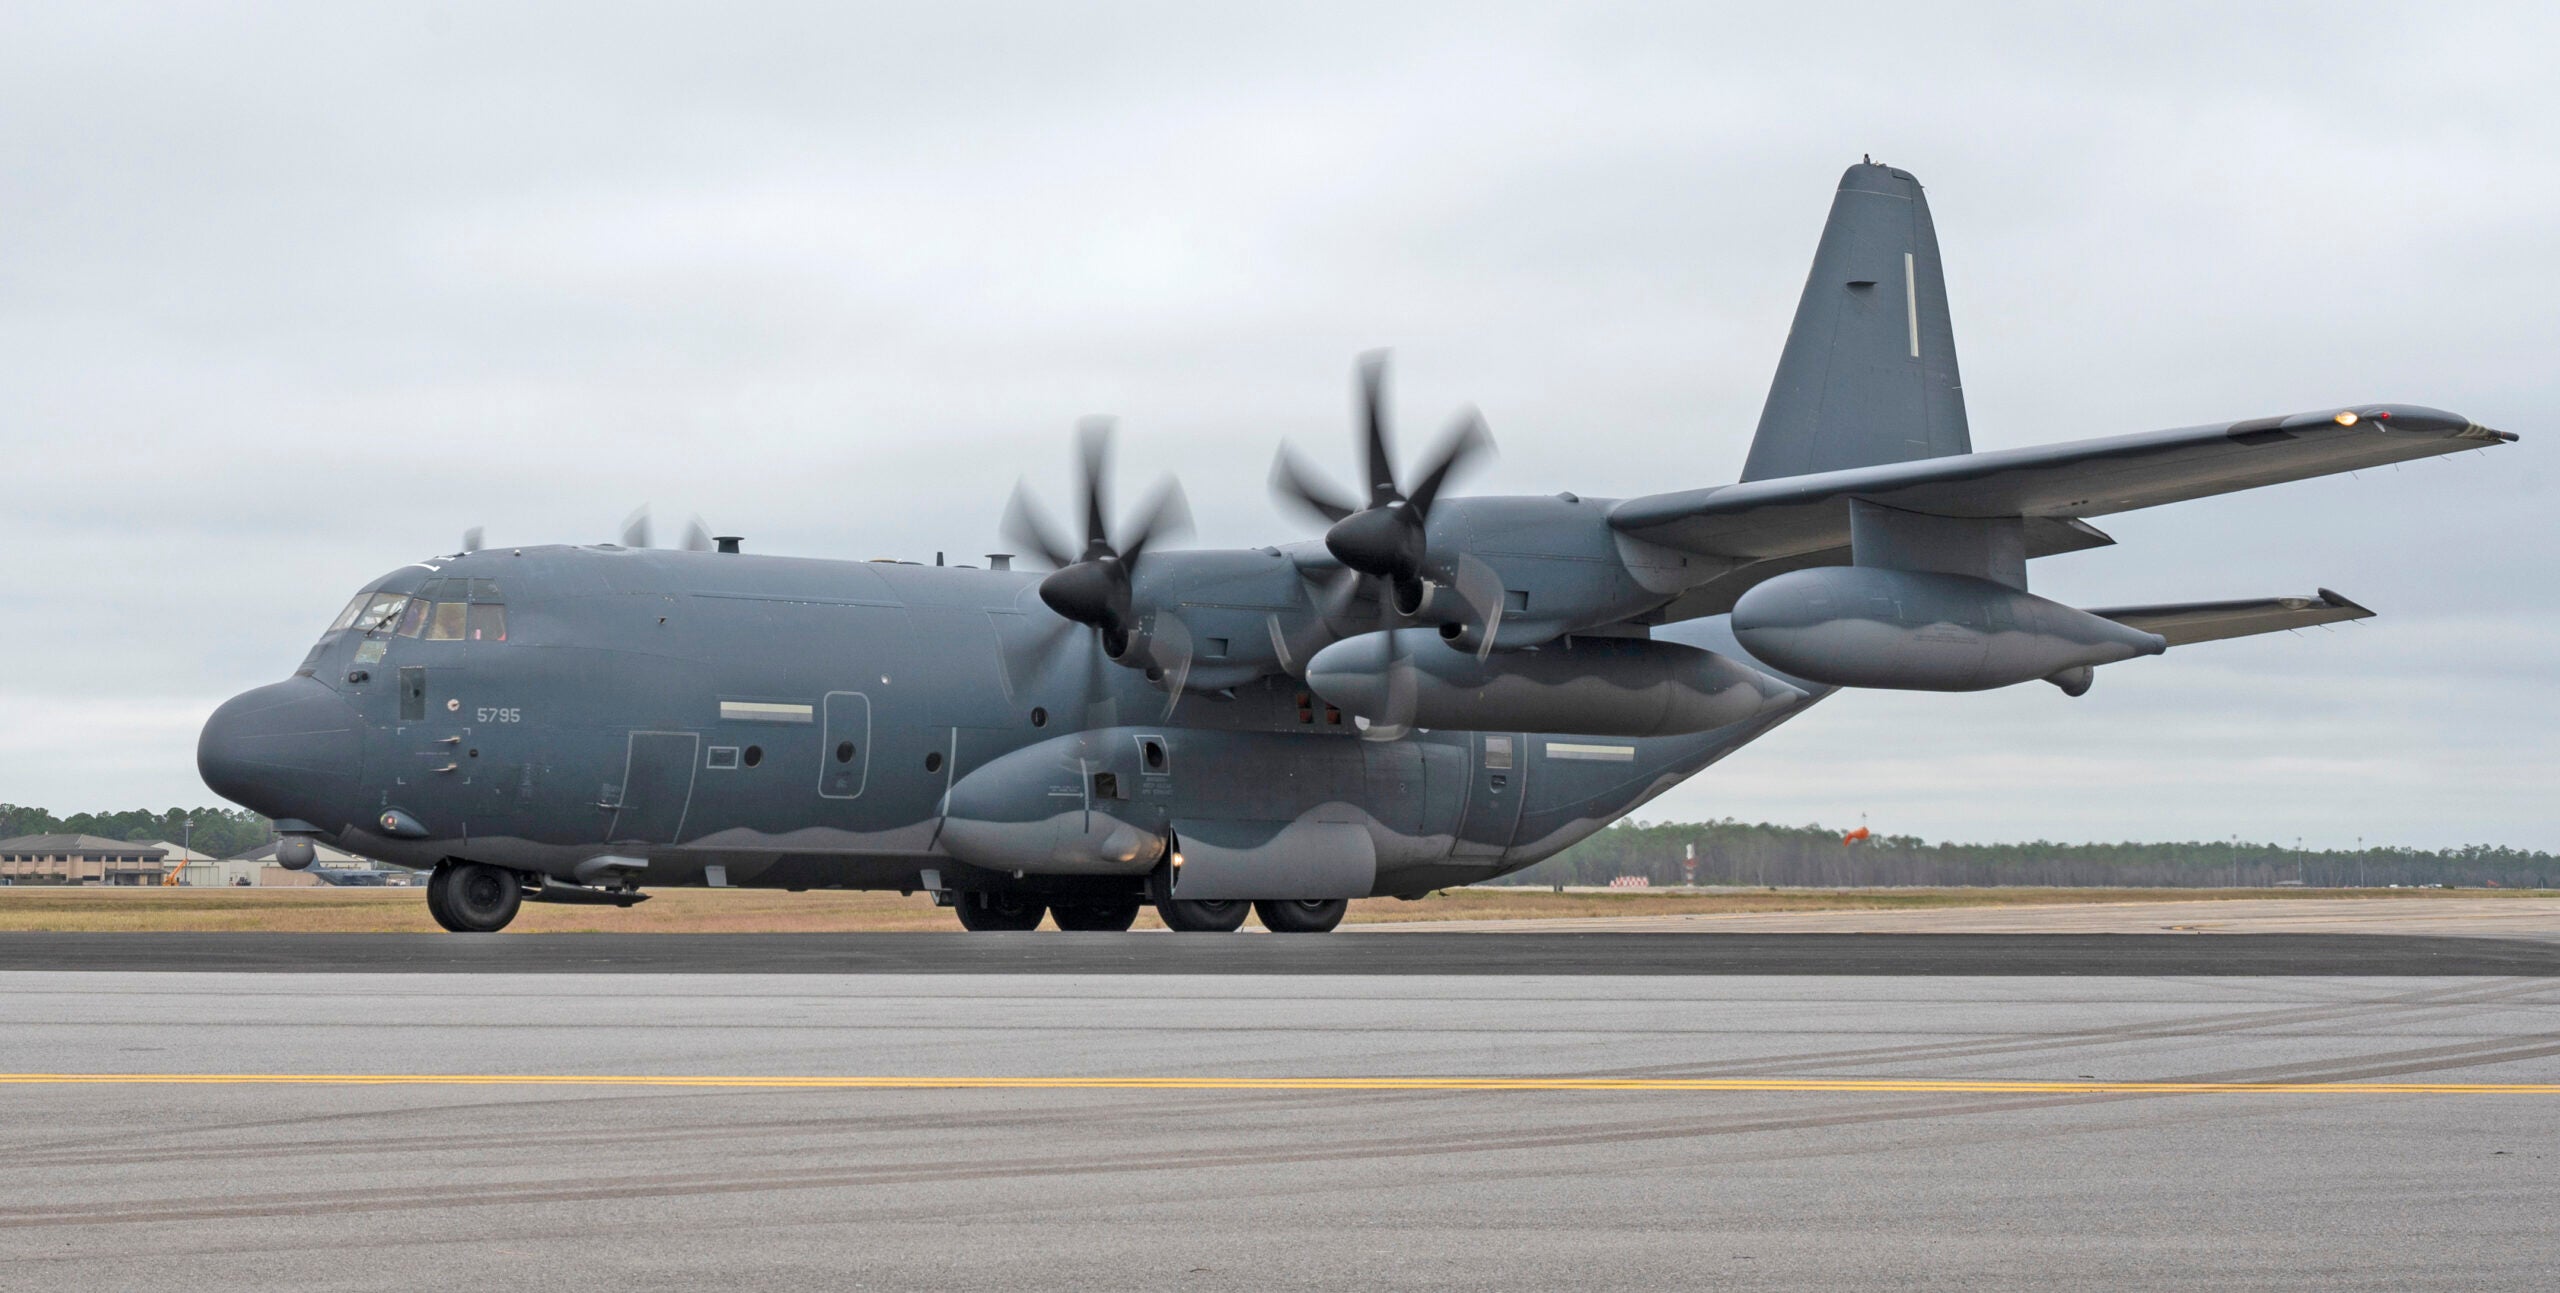 An MC-130J Commando II assigned to the 9th Special Operations Squadron taxis during Agile Flag 21-1 at Hurlburt Field, Florida, Oct. 27, 2020. The Commando II flies clandestine, or low visibility, single or multiship, low-level air refueling missions for special operations helicopters and tiltrotor aircraft, and infiltration, exfiltration, and resupply of special operations forces by airdrop or airland intruding politically sensitive or hostile territories. (U.S. Air Force photo by Staff Sgt. Joseph Pick)